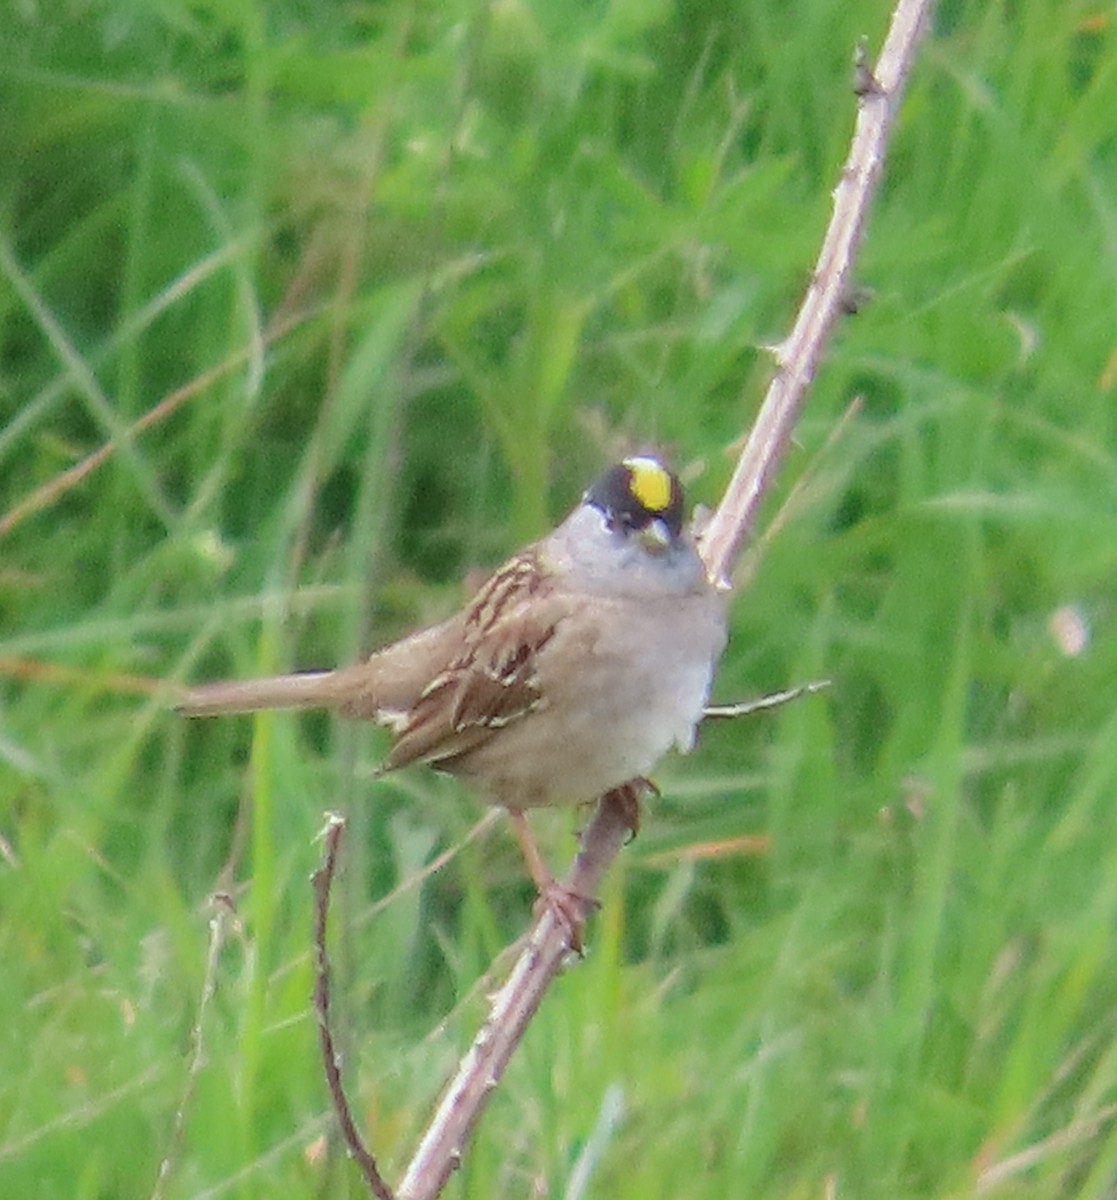 Golden-crowned Sparrow - The Spotting Twohees